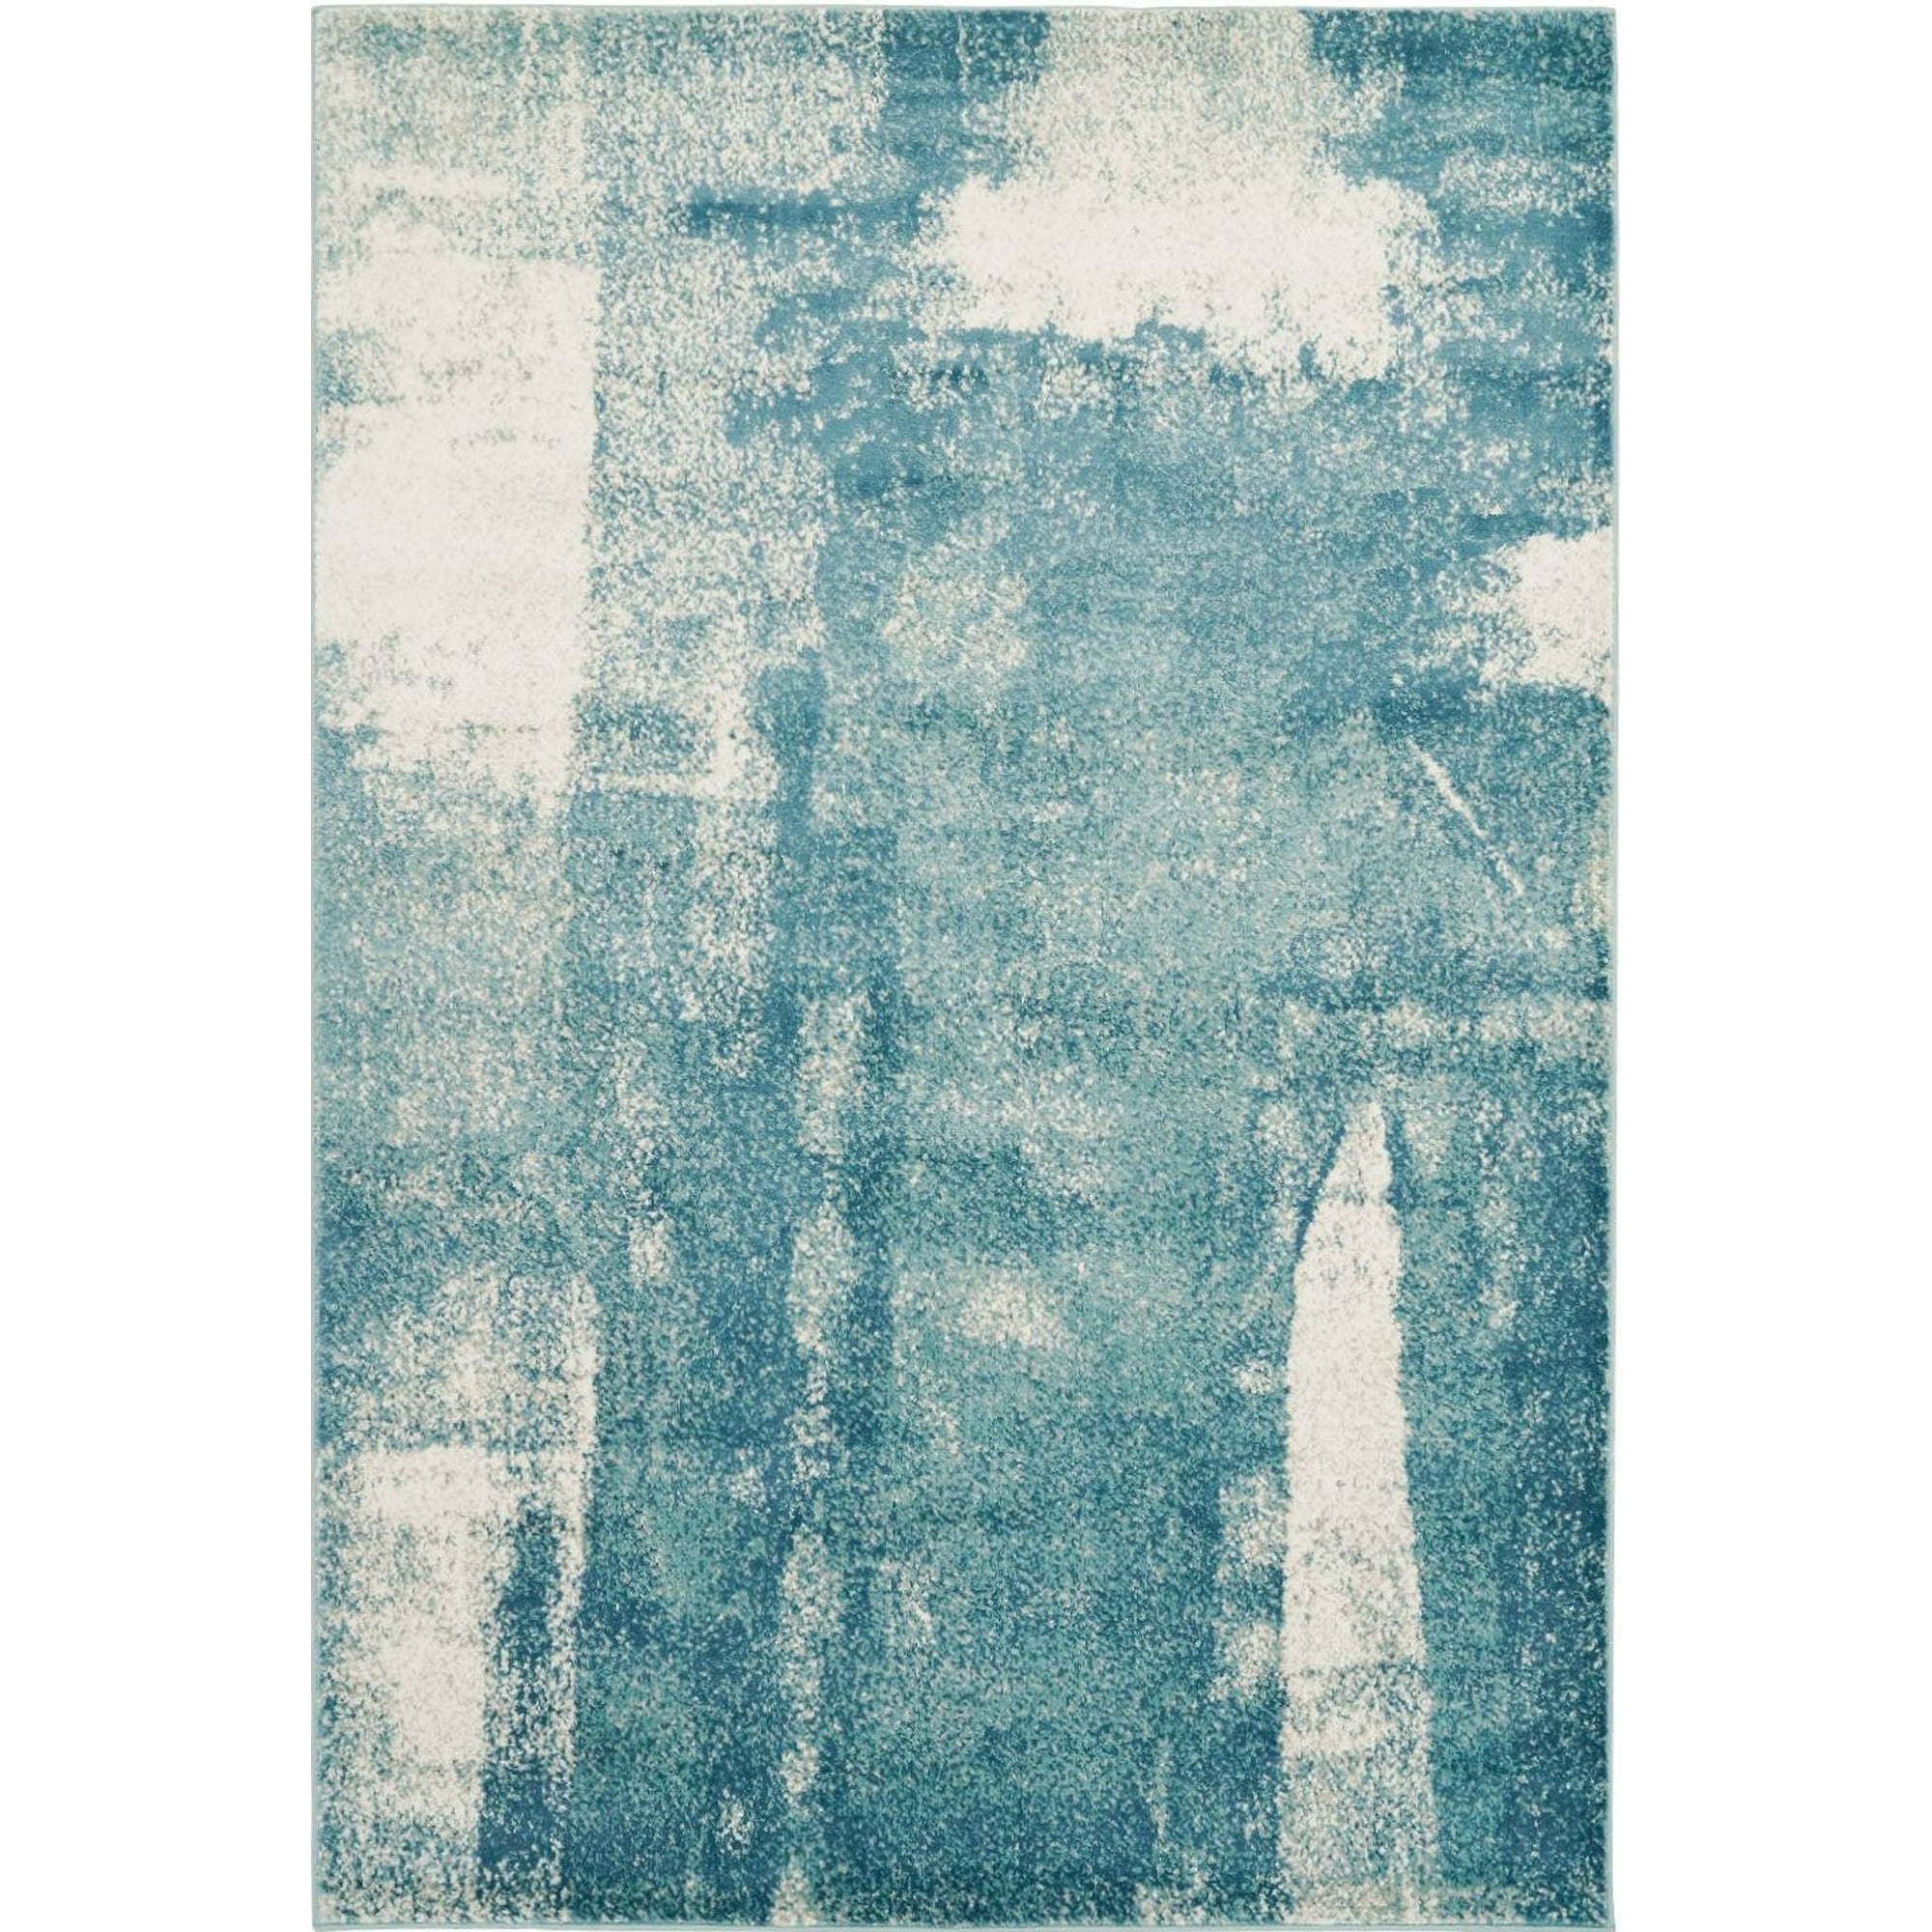 Ladole Rugs Turquoise Blue And Black, Turquoise Area Rug